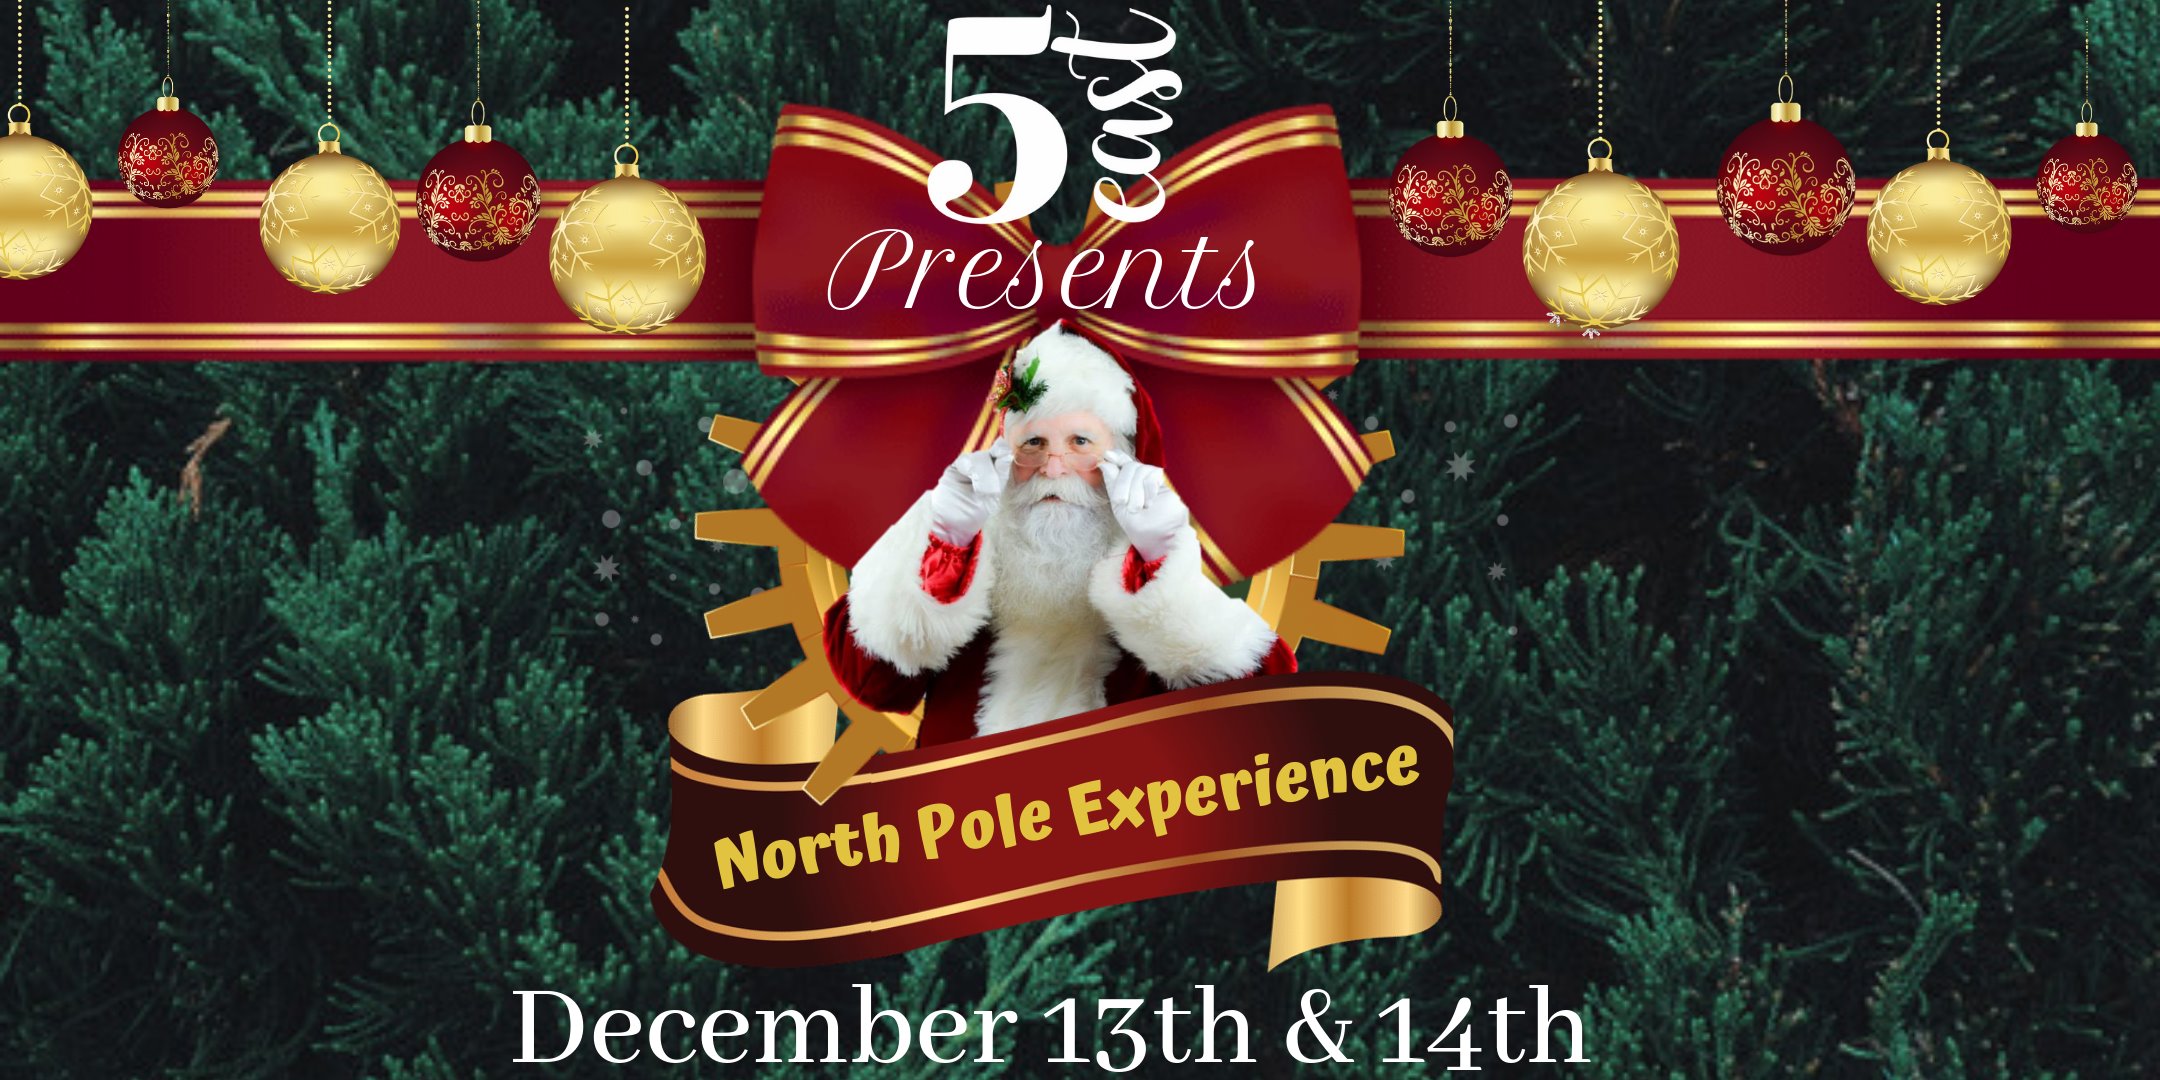 5 East in Mooresville will host a very special North Pole Experience on Dec. 13 and 14. Advance tickets are required.